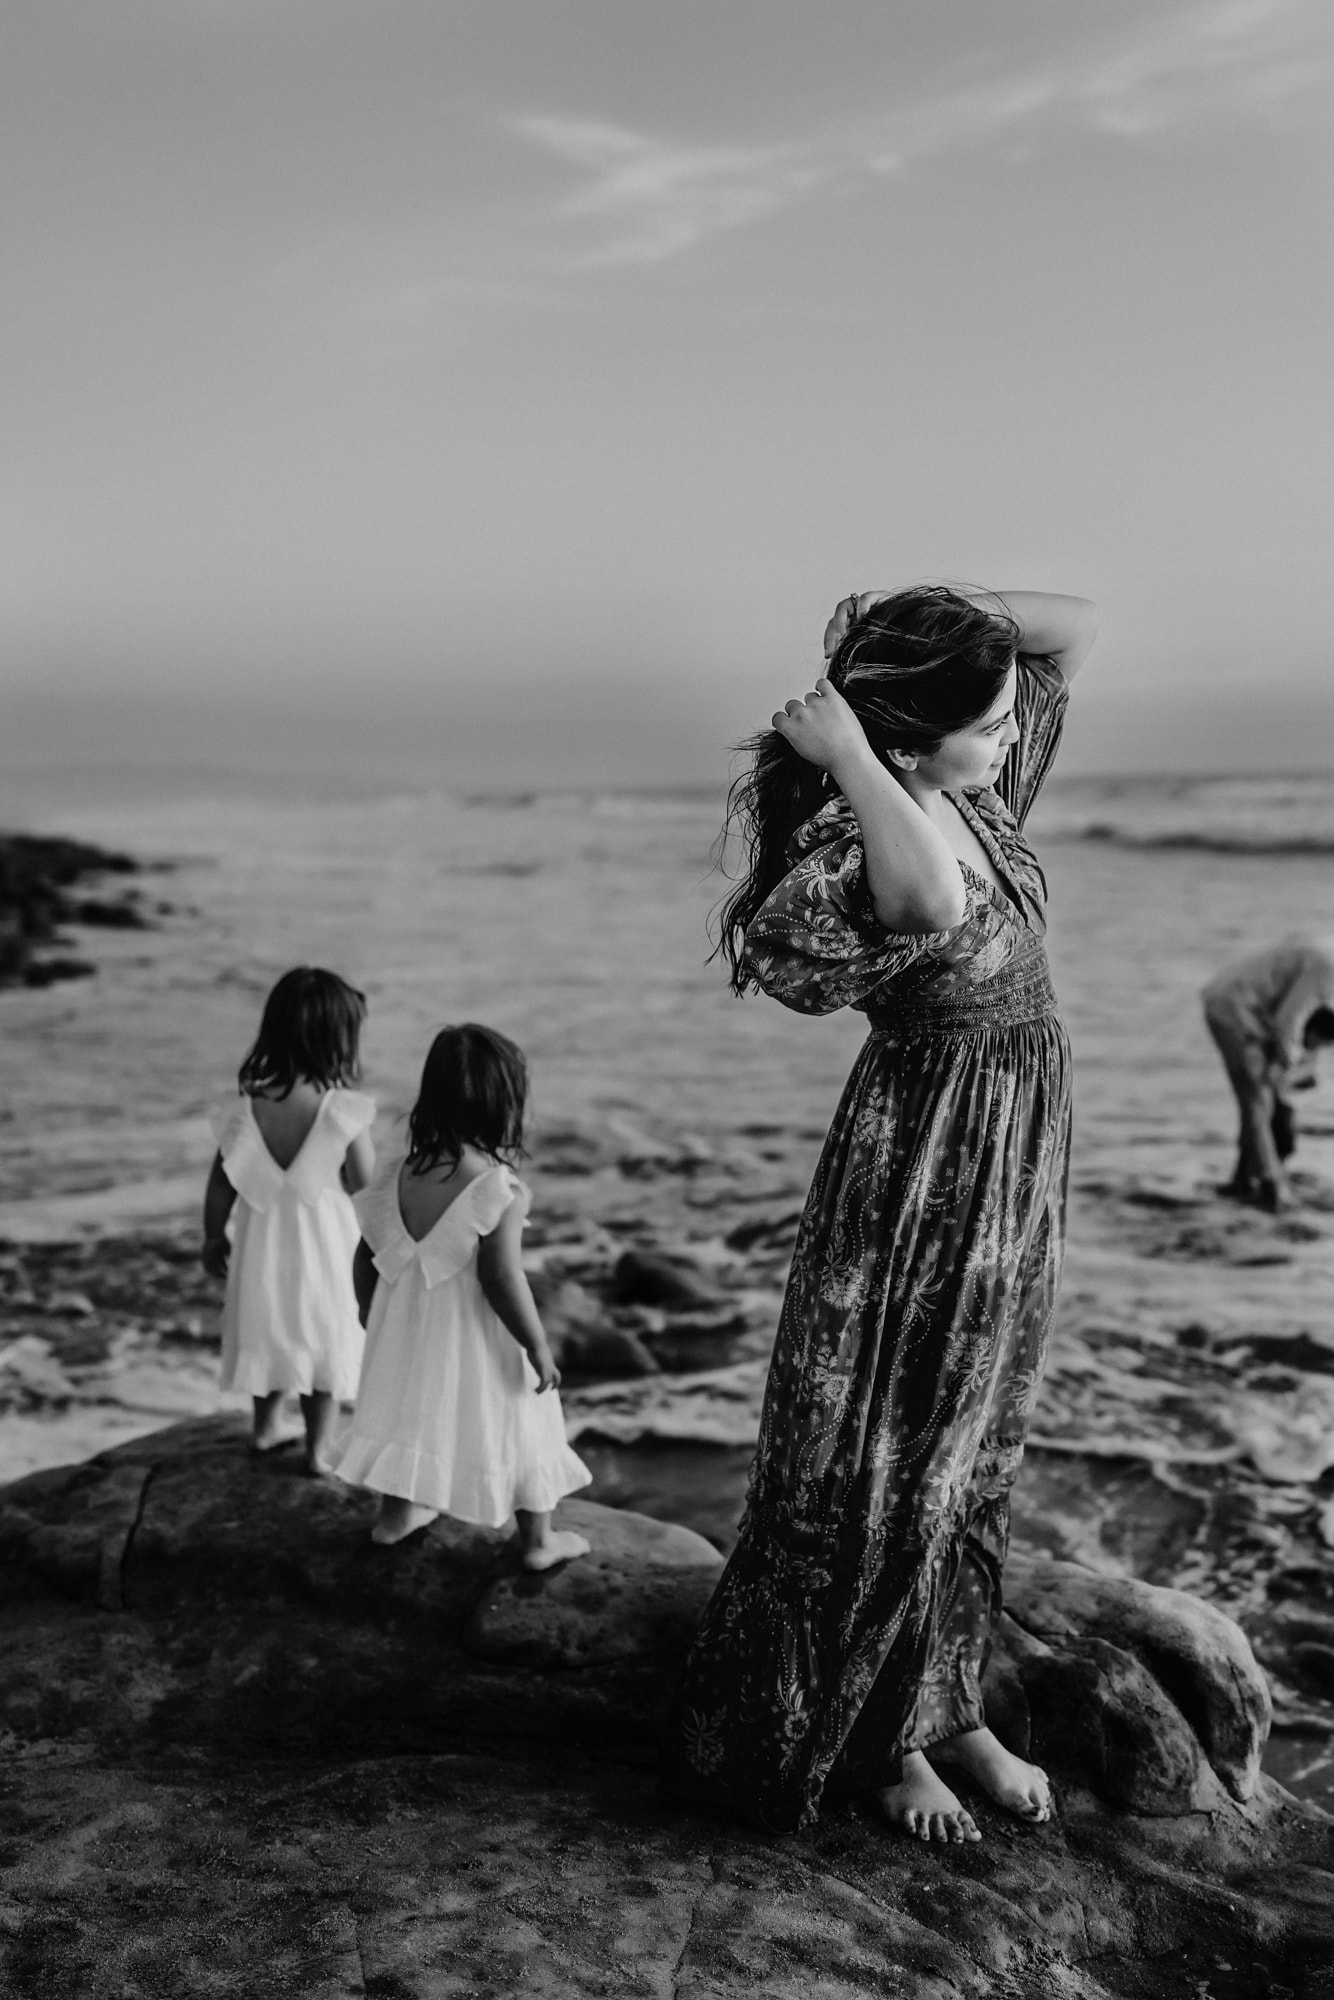 A woman standing on a rock fixing her hair, with her twin daughters behind her, on the beach in Del Mar, California.